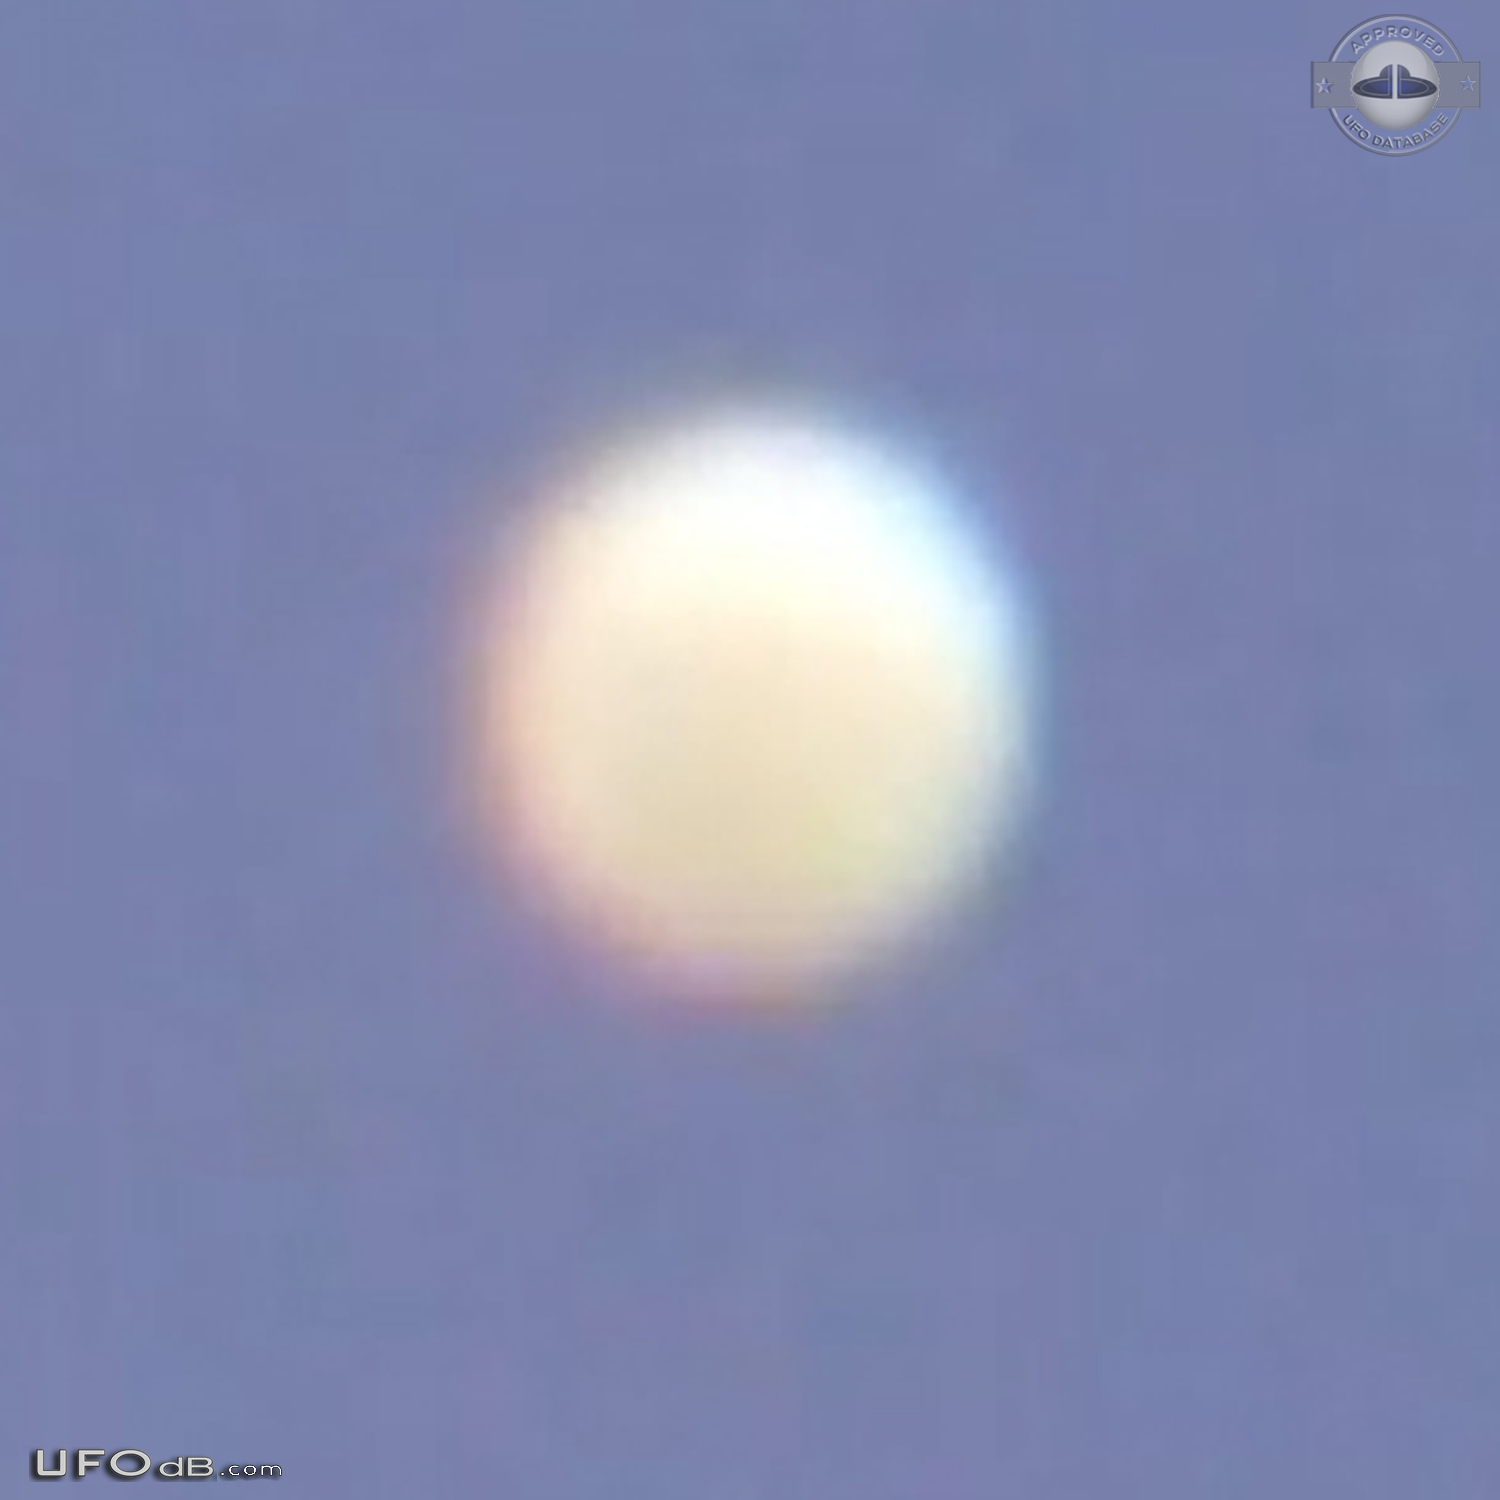 Orb captured with telescope at UFO Sighting Event - California 2016 UFO Picture #788-3